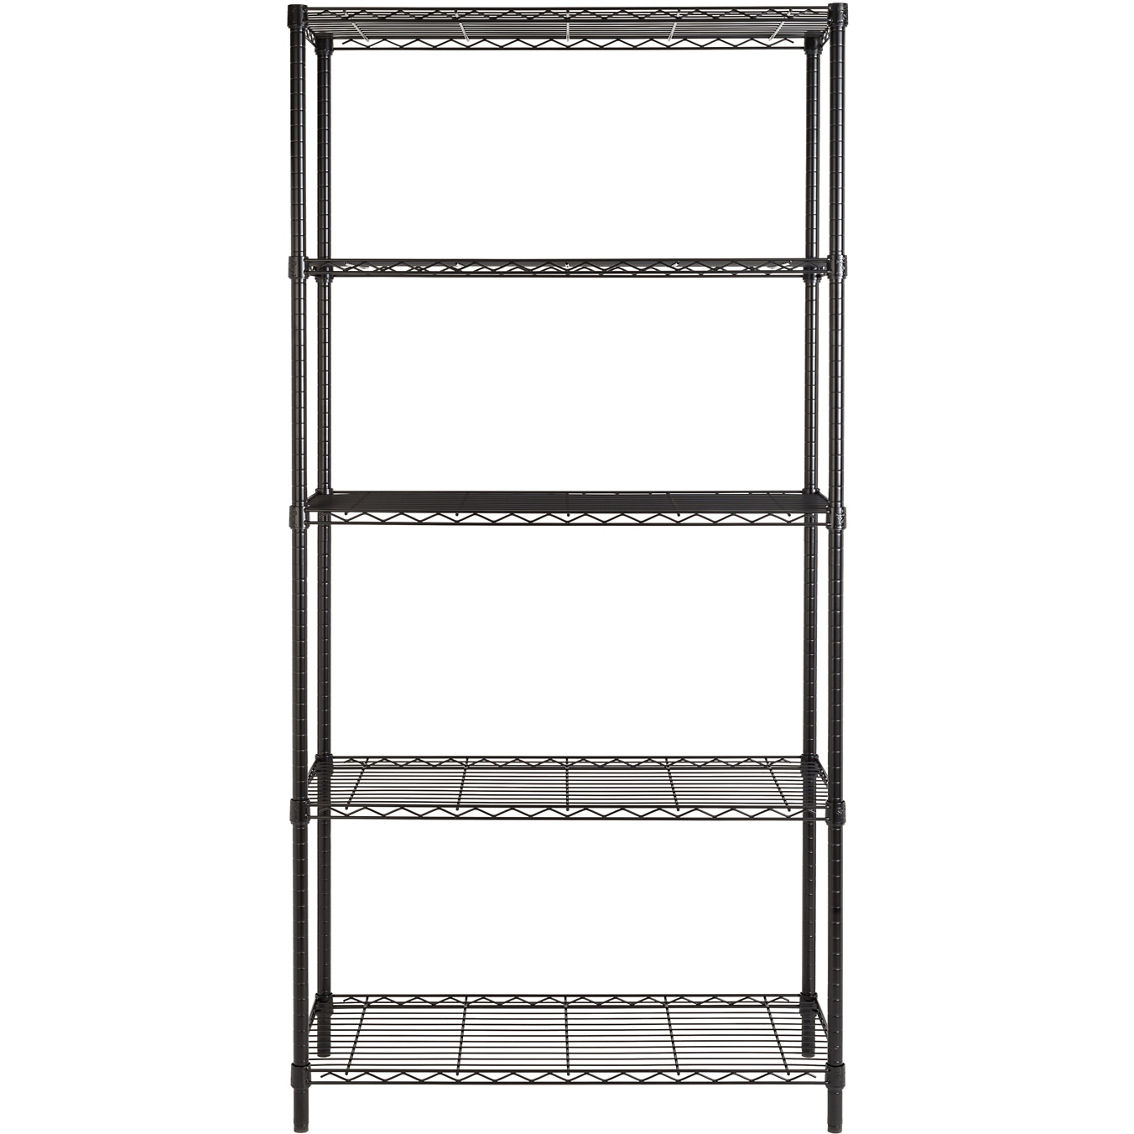 Honey Can Do 5 Tier Black Shelving System - Image 4 of 7